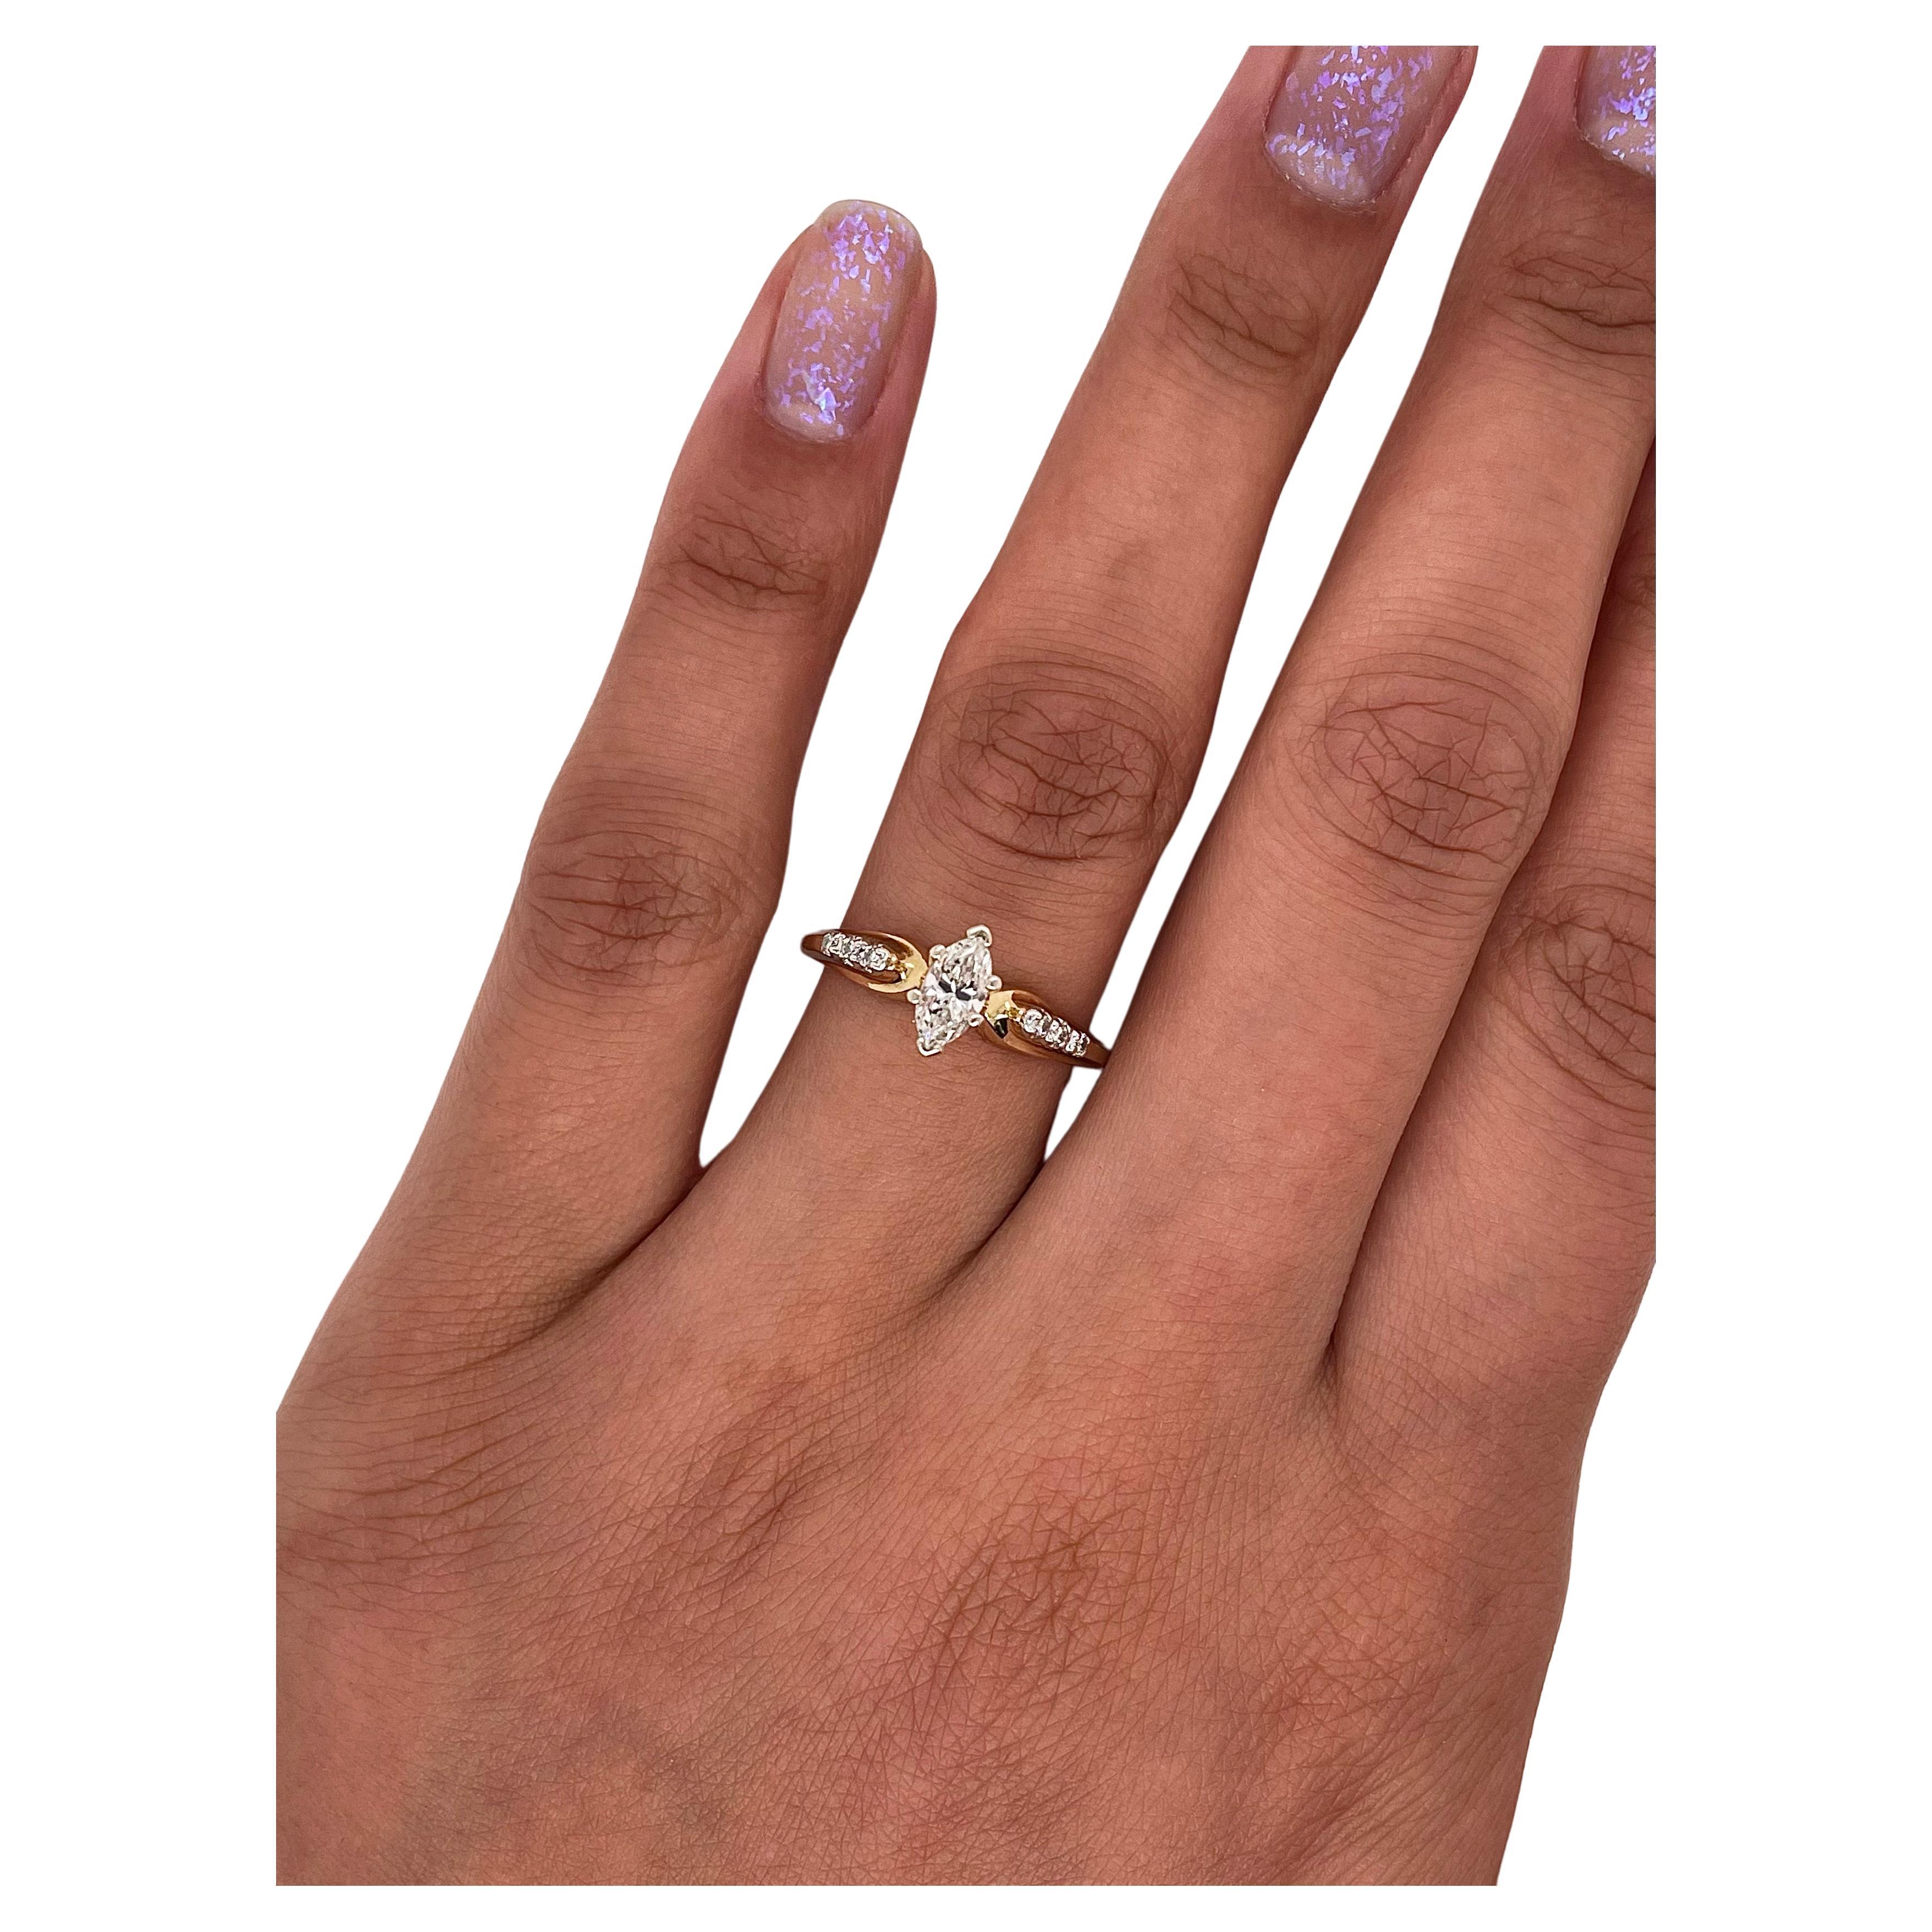 0.28 Total Carat Marquise Prong-Set Engagement Ring

-14K Yellow Gold
-0.25 Carat Marquise Center Stone  
-H-I Color
-SI Clarity
-0.03 Carat Round Side Stones
-Size 7.25

Resize is available!

Made in New York City.